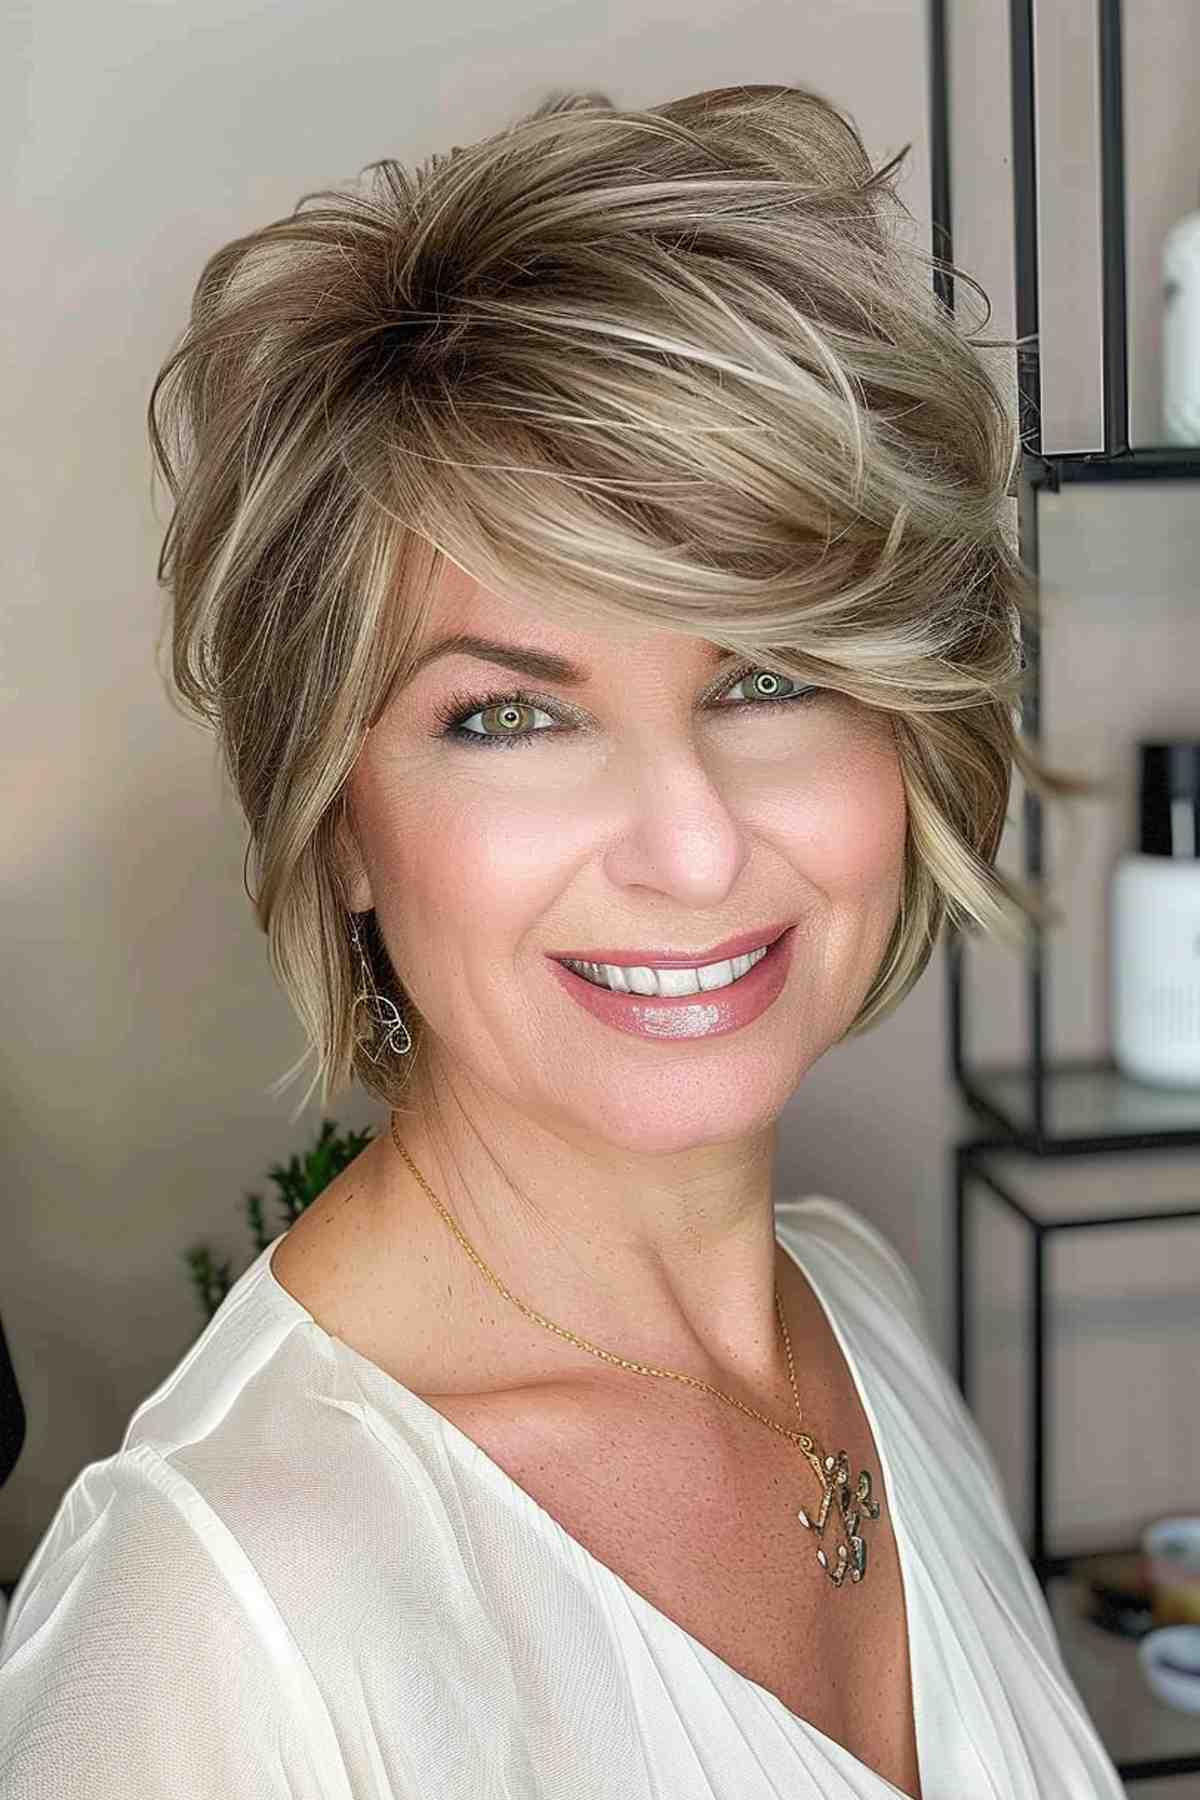 Short shaggy cut with layered texture and a deep side part for added volume